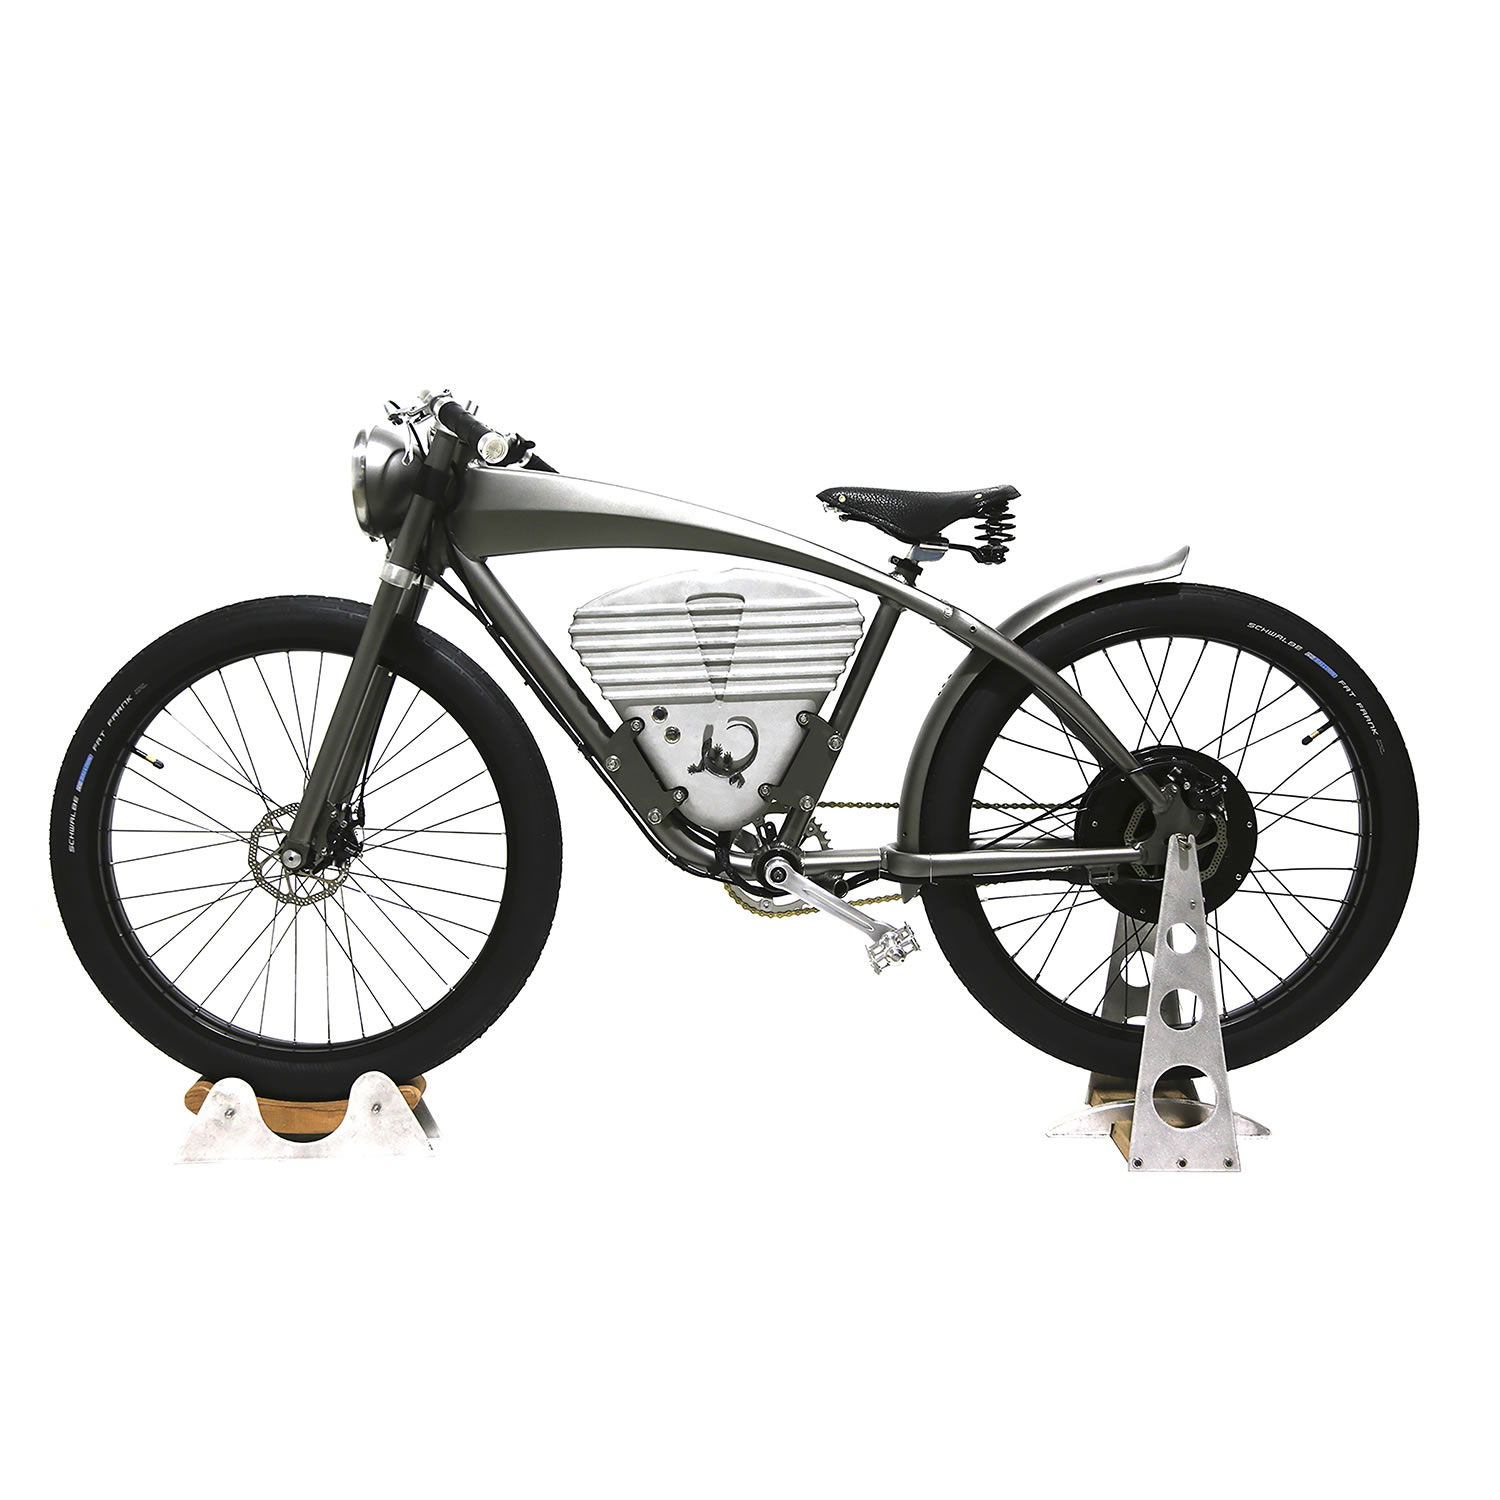 "ICON E-Flyer Electric Bicycle " by Jonathan Ward and Andrew Davidge.